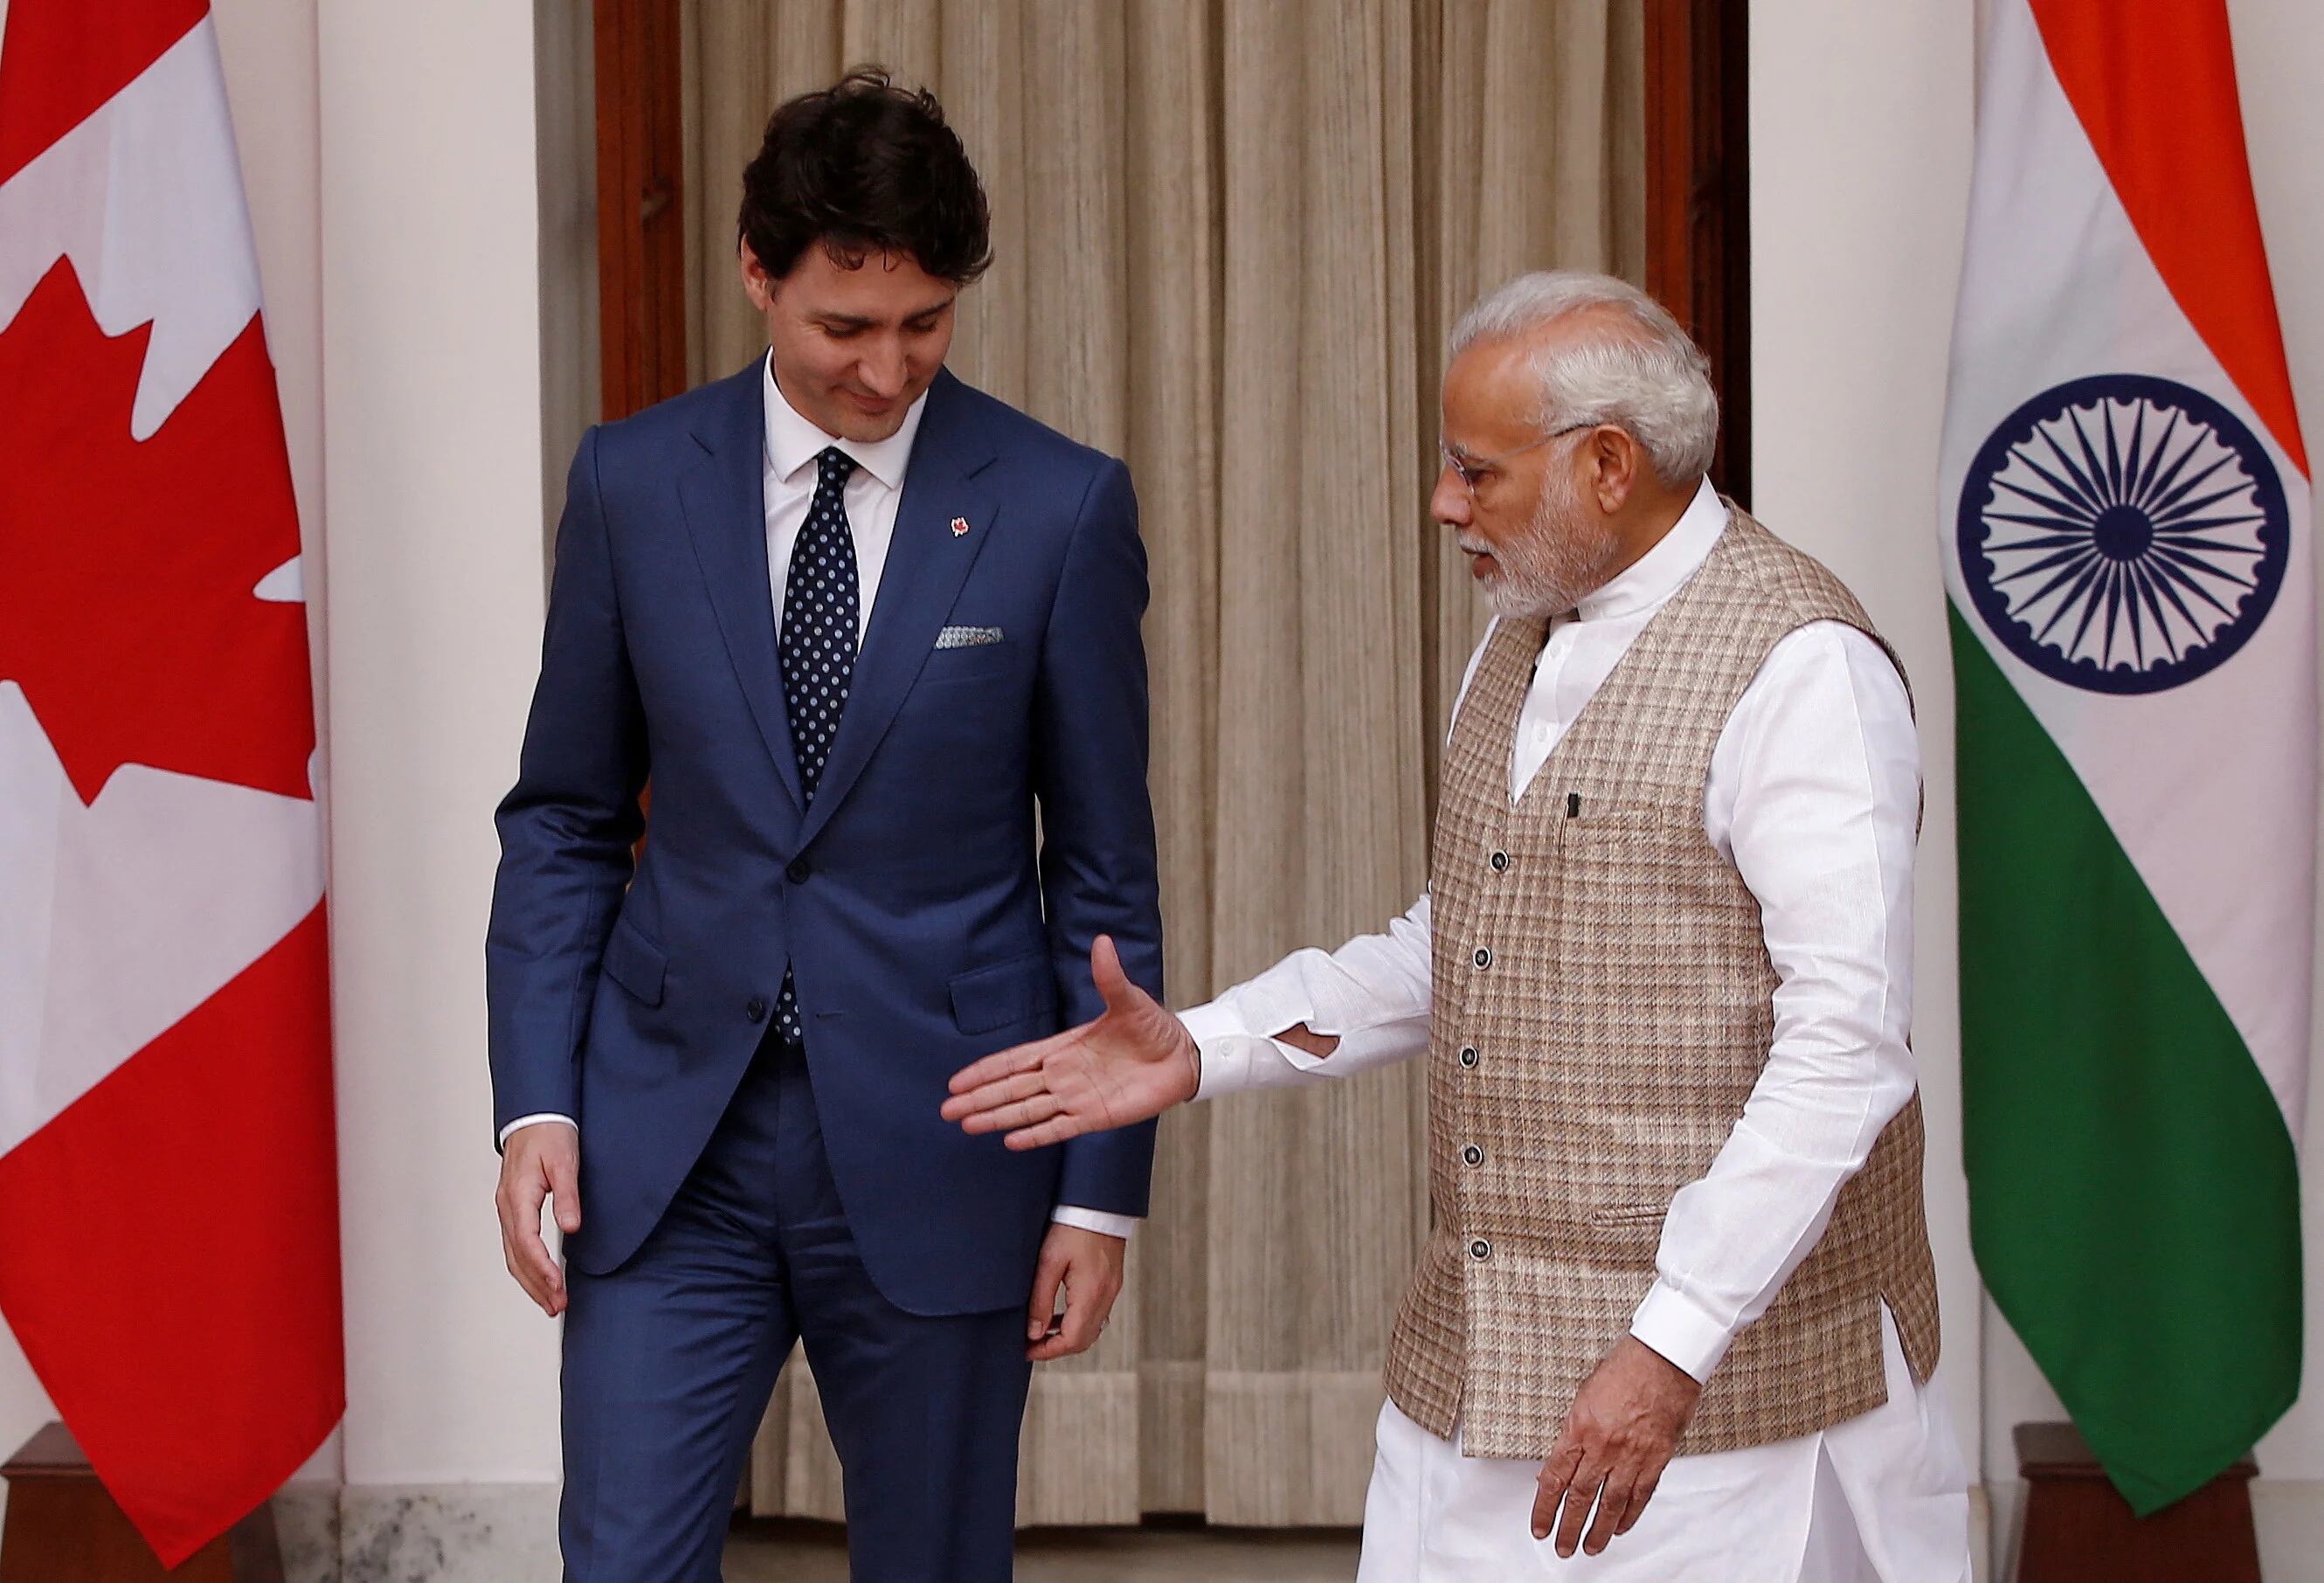 FILE PHOTO: Indian Prime Minister Narendra Modi (R) extends his hand for a handshake with his Canadian counterpart Justin Trudeau during a photo opportunity ahead of their meeting at Hyderabad House in New Delhi, India, February 23, 2018. REUTERS/Adnan Abidi/File Photo